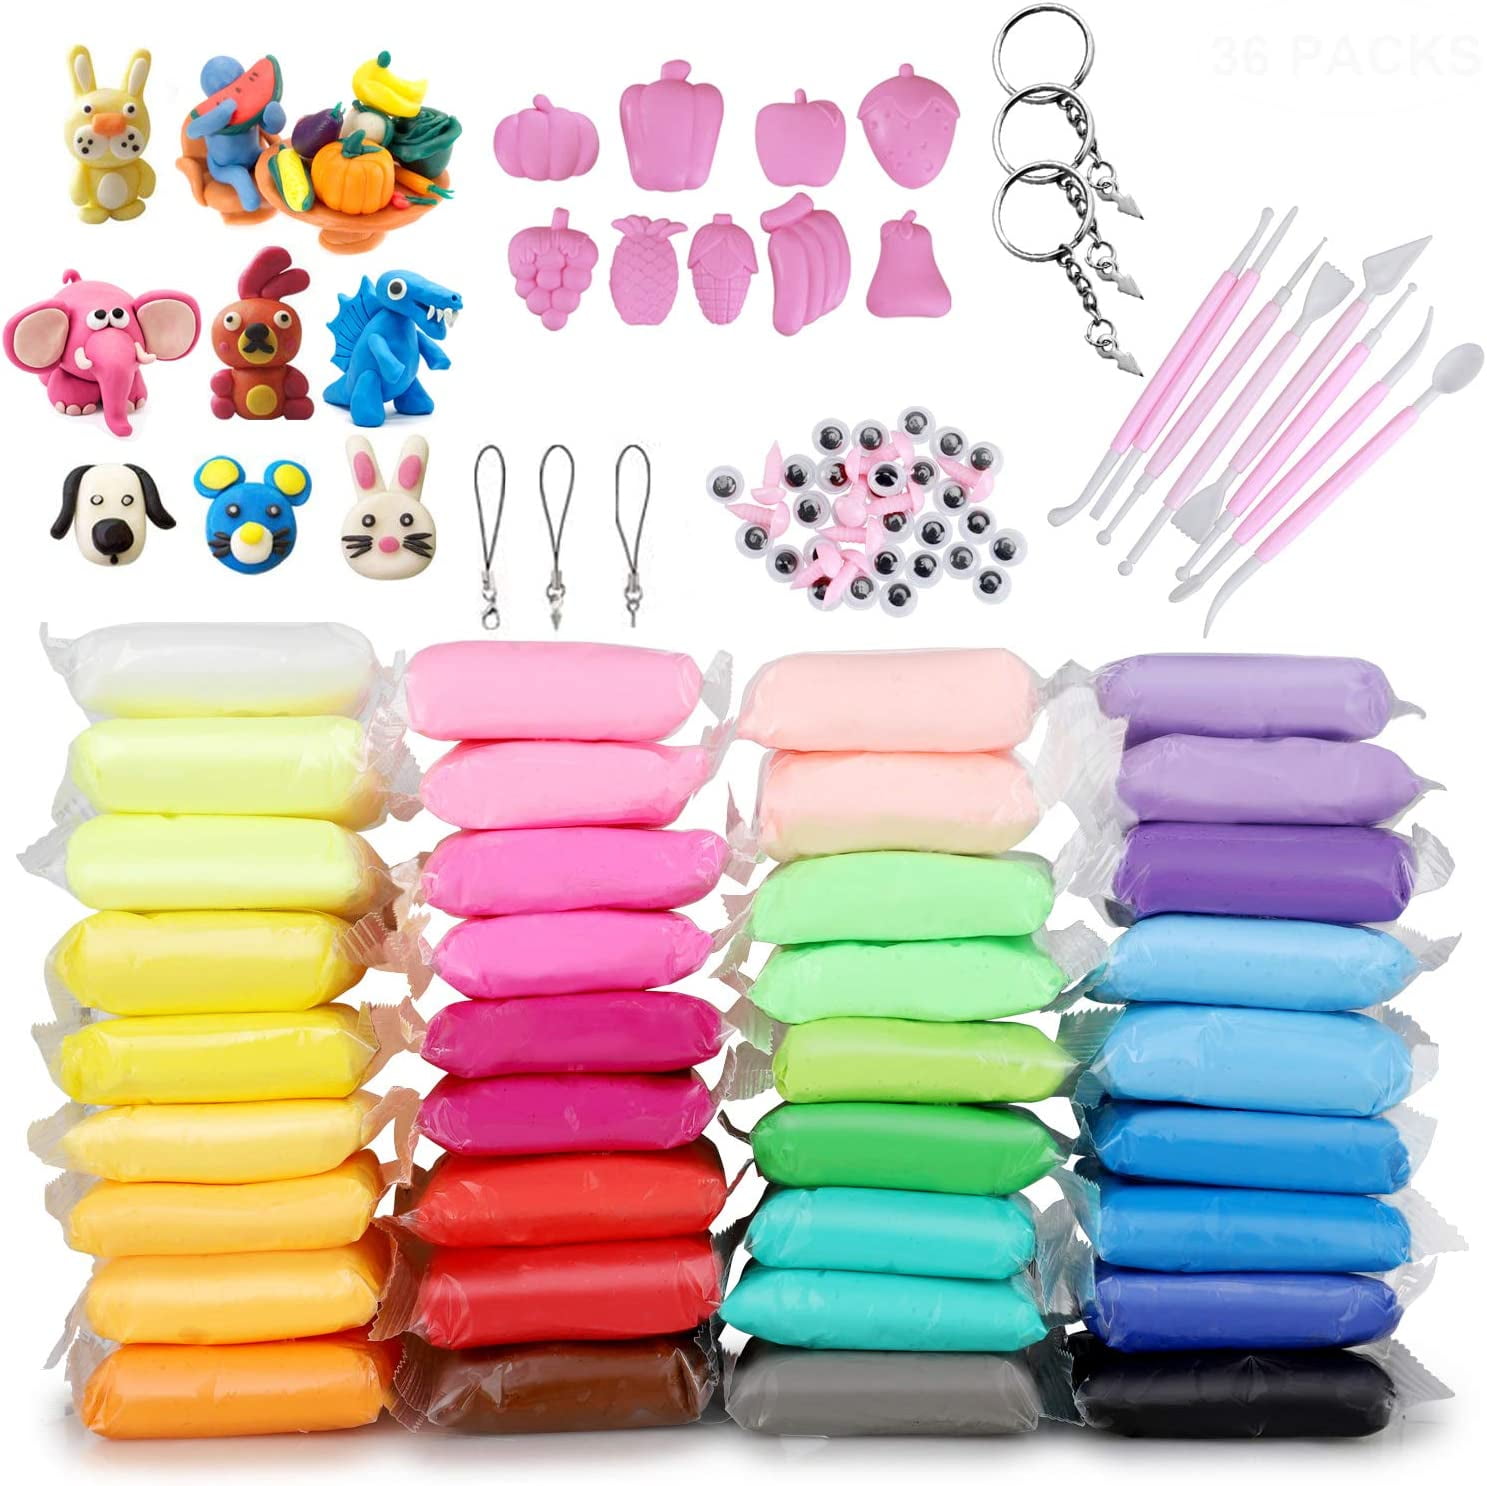 Modeling Clay Kit - 36 Colors Magic Air Dry Ultra Light Clay, Safe &  Non-Toxic, Great Toy Gift for Boys and Girls